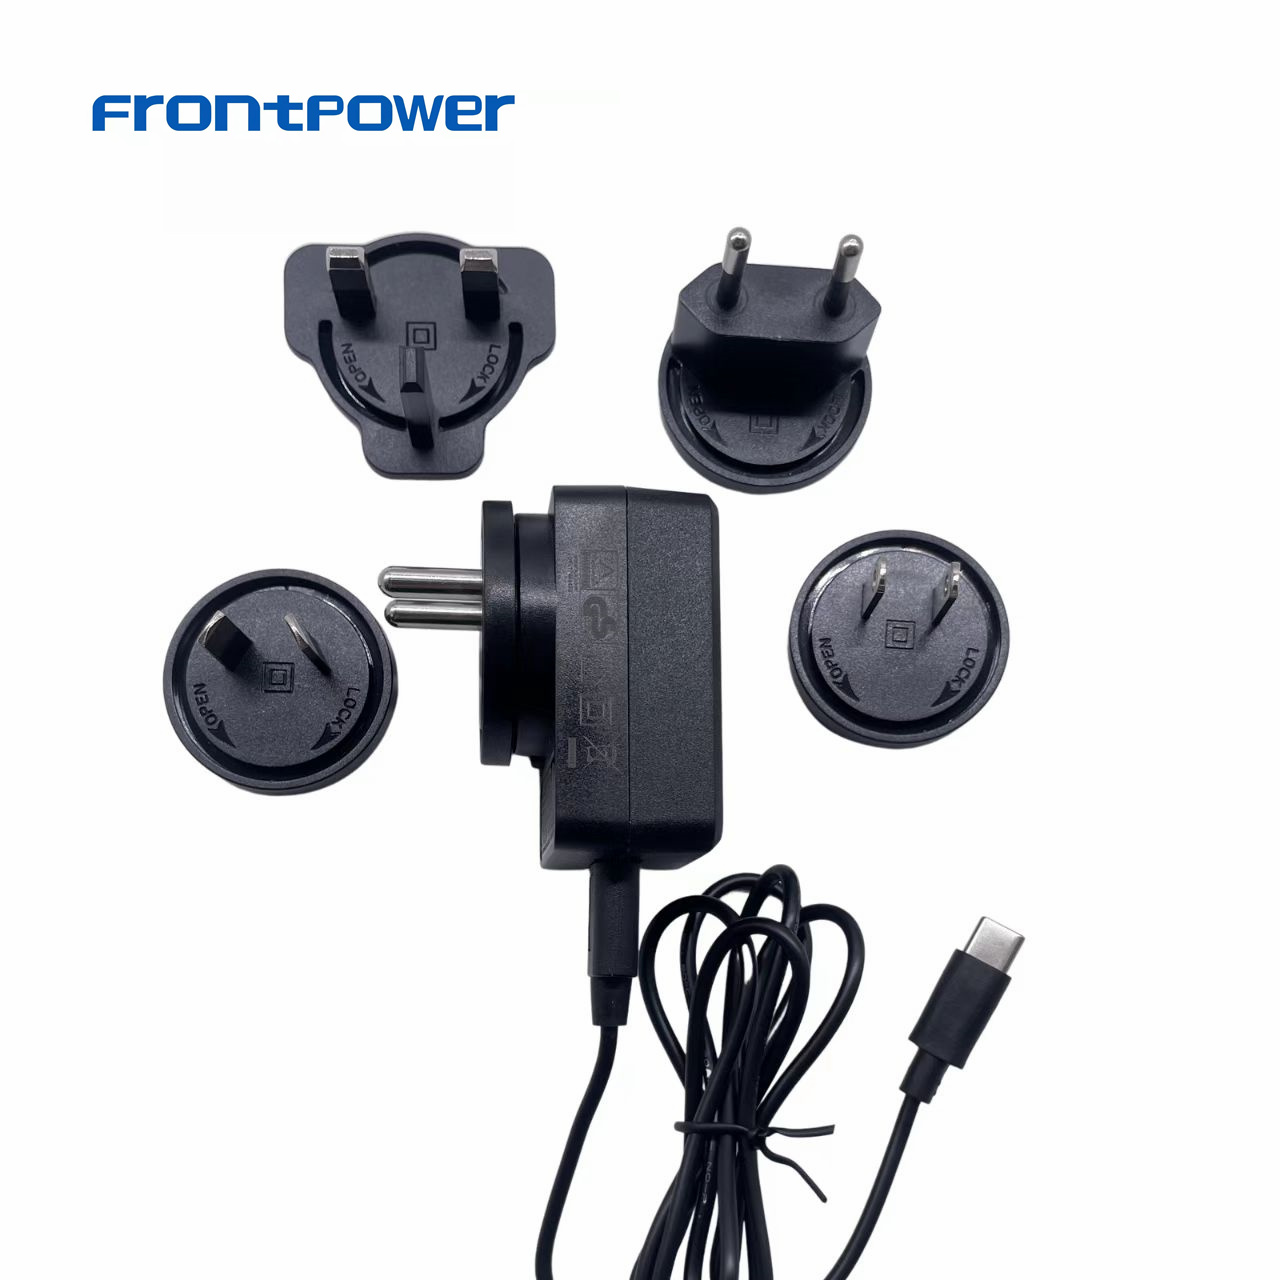 5V 2A wall mount power adapter with BIS certification